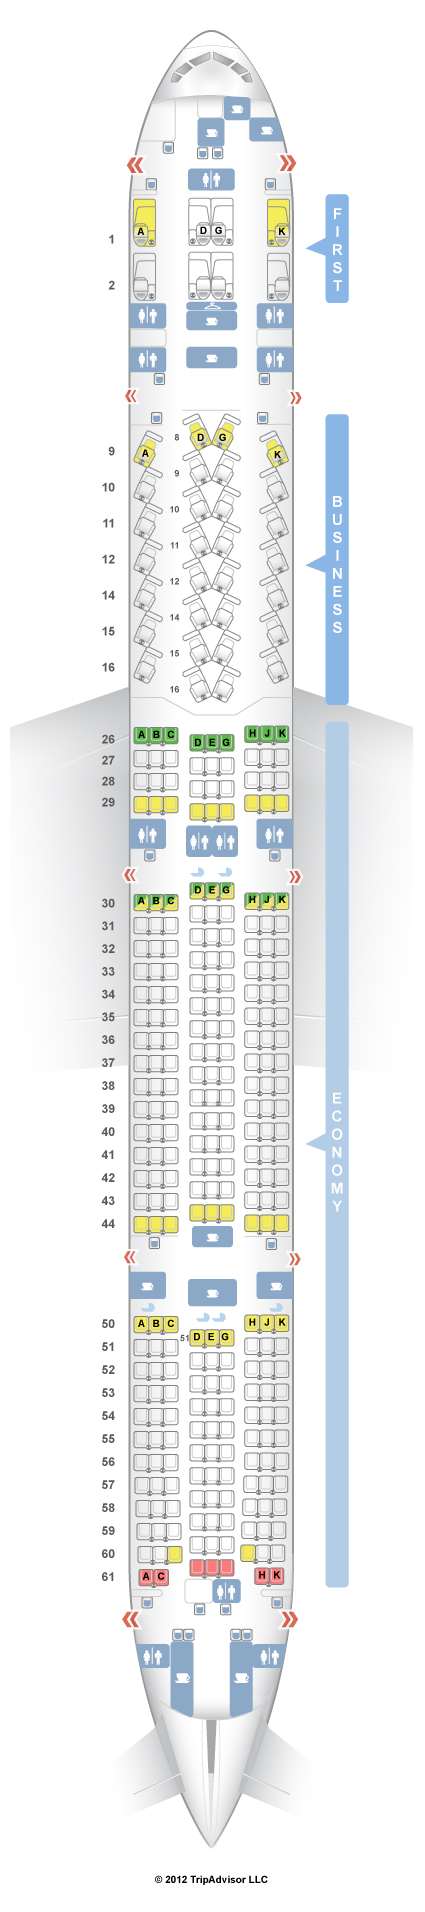 turkish airlines seat map boeing 787 9